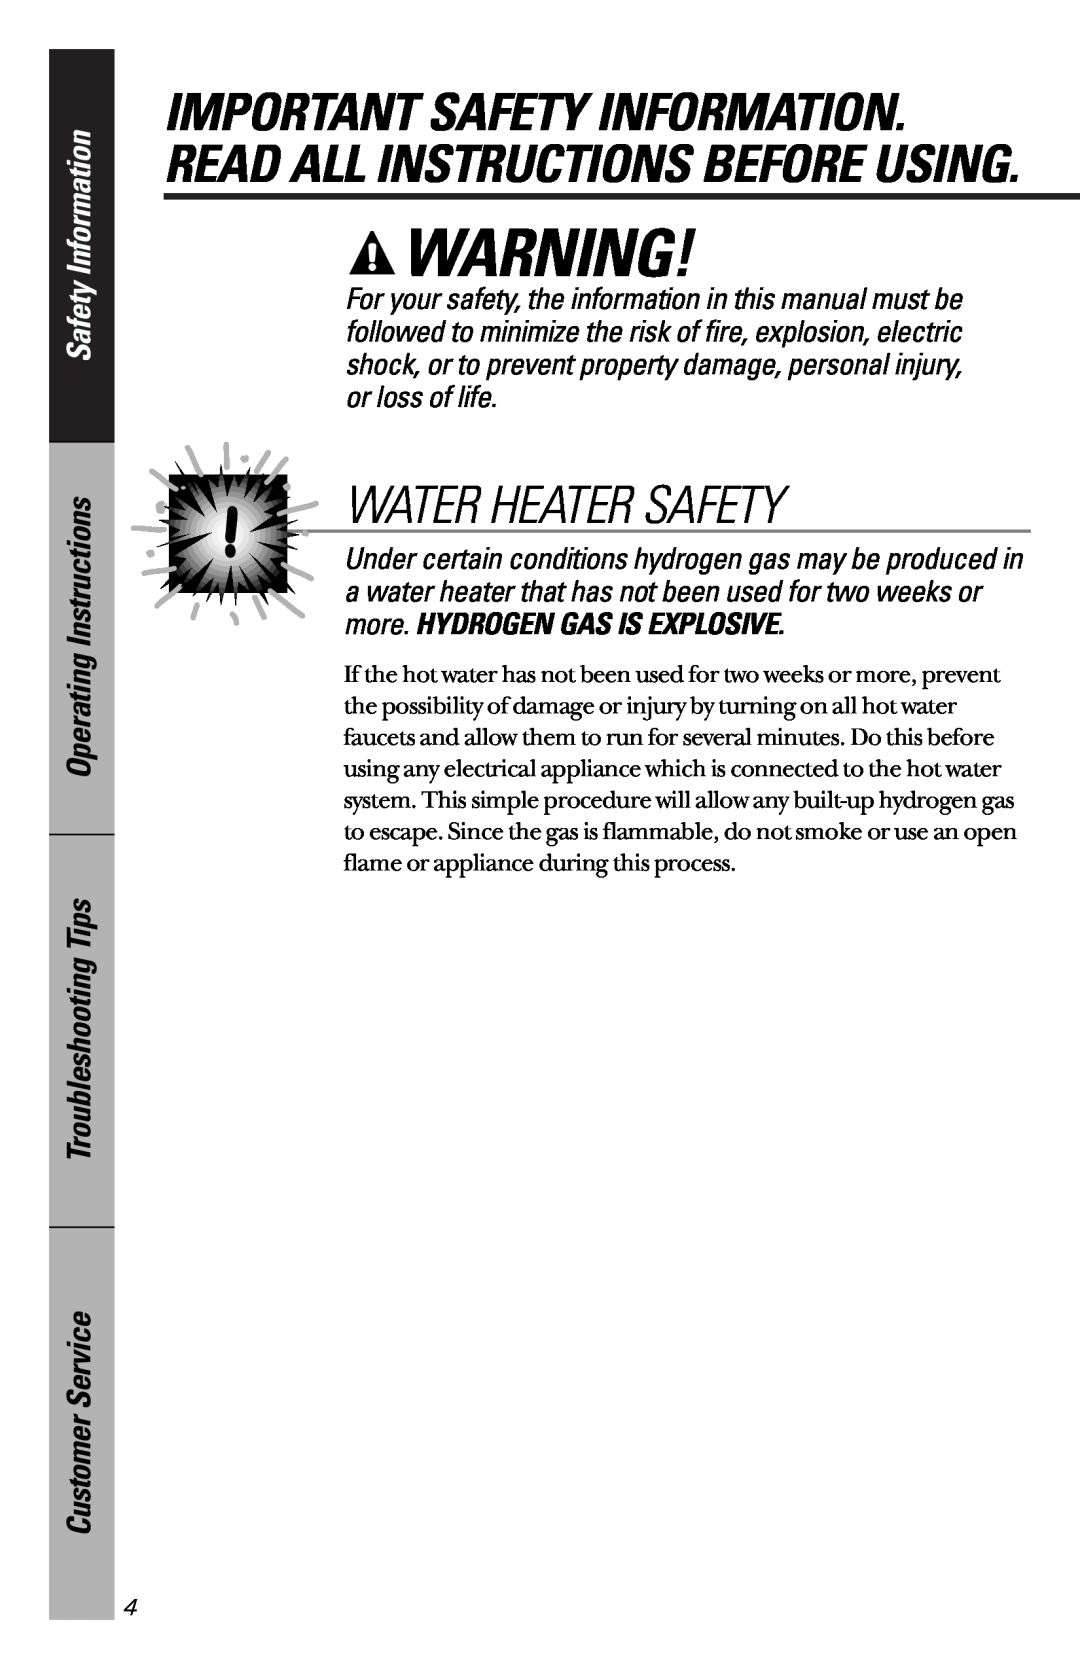 Hotpoint HDA3200 Water Heater Safety, Safety Information, Operating Instructions Troubleshooting Tips, Customer Service 